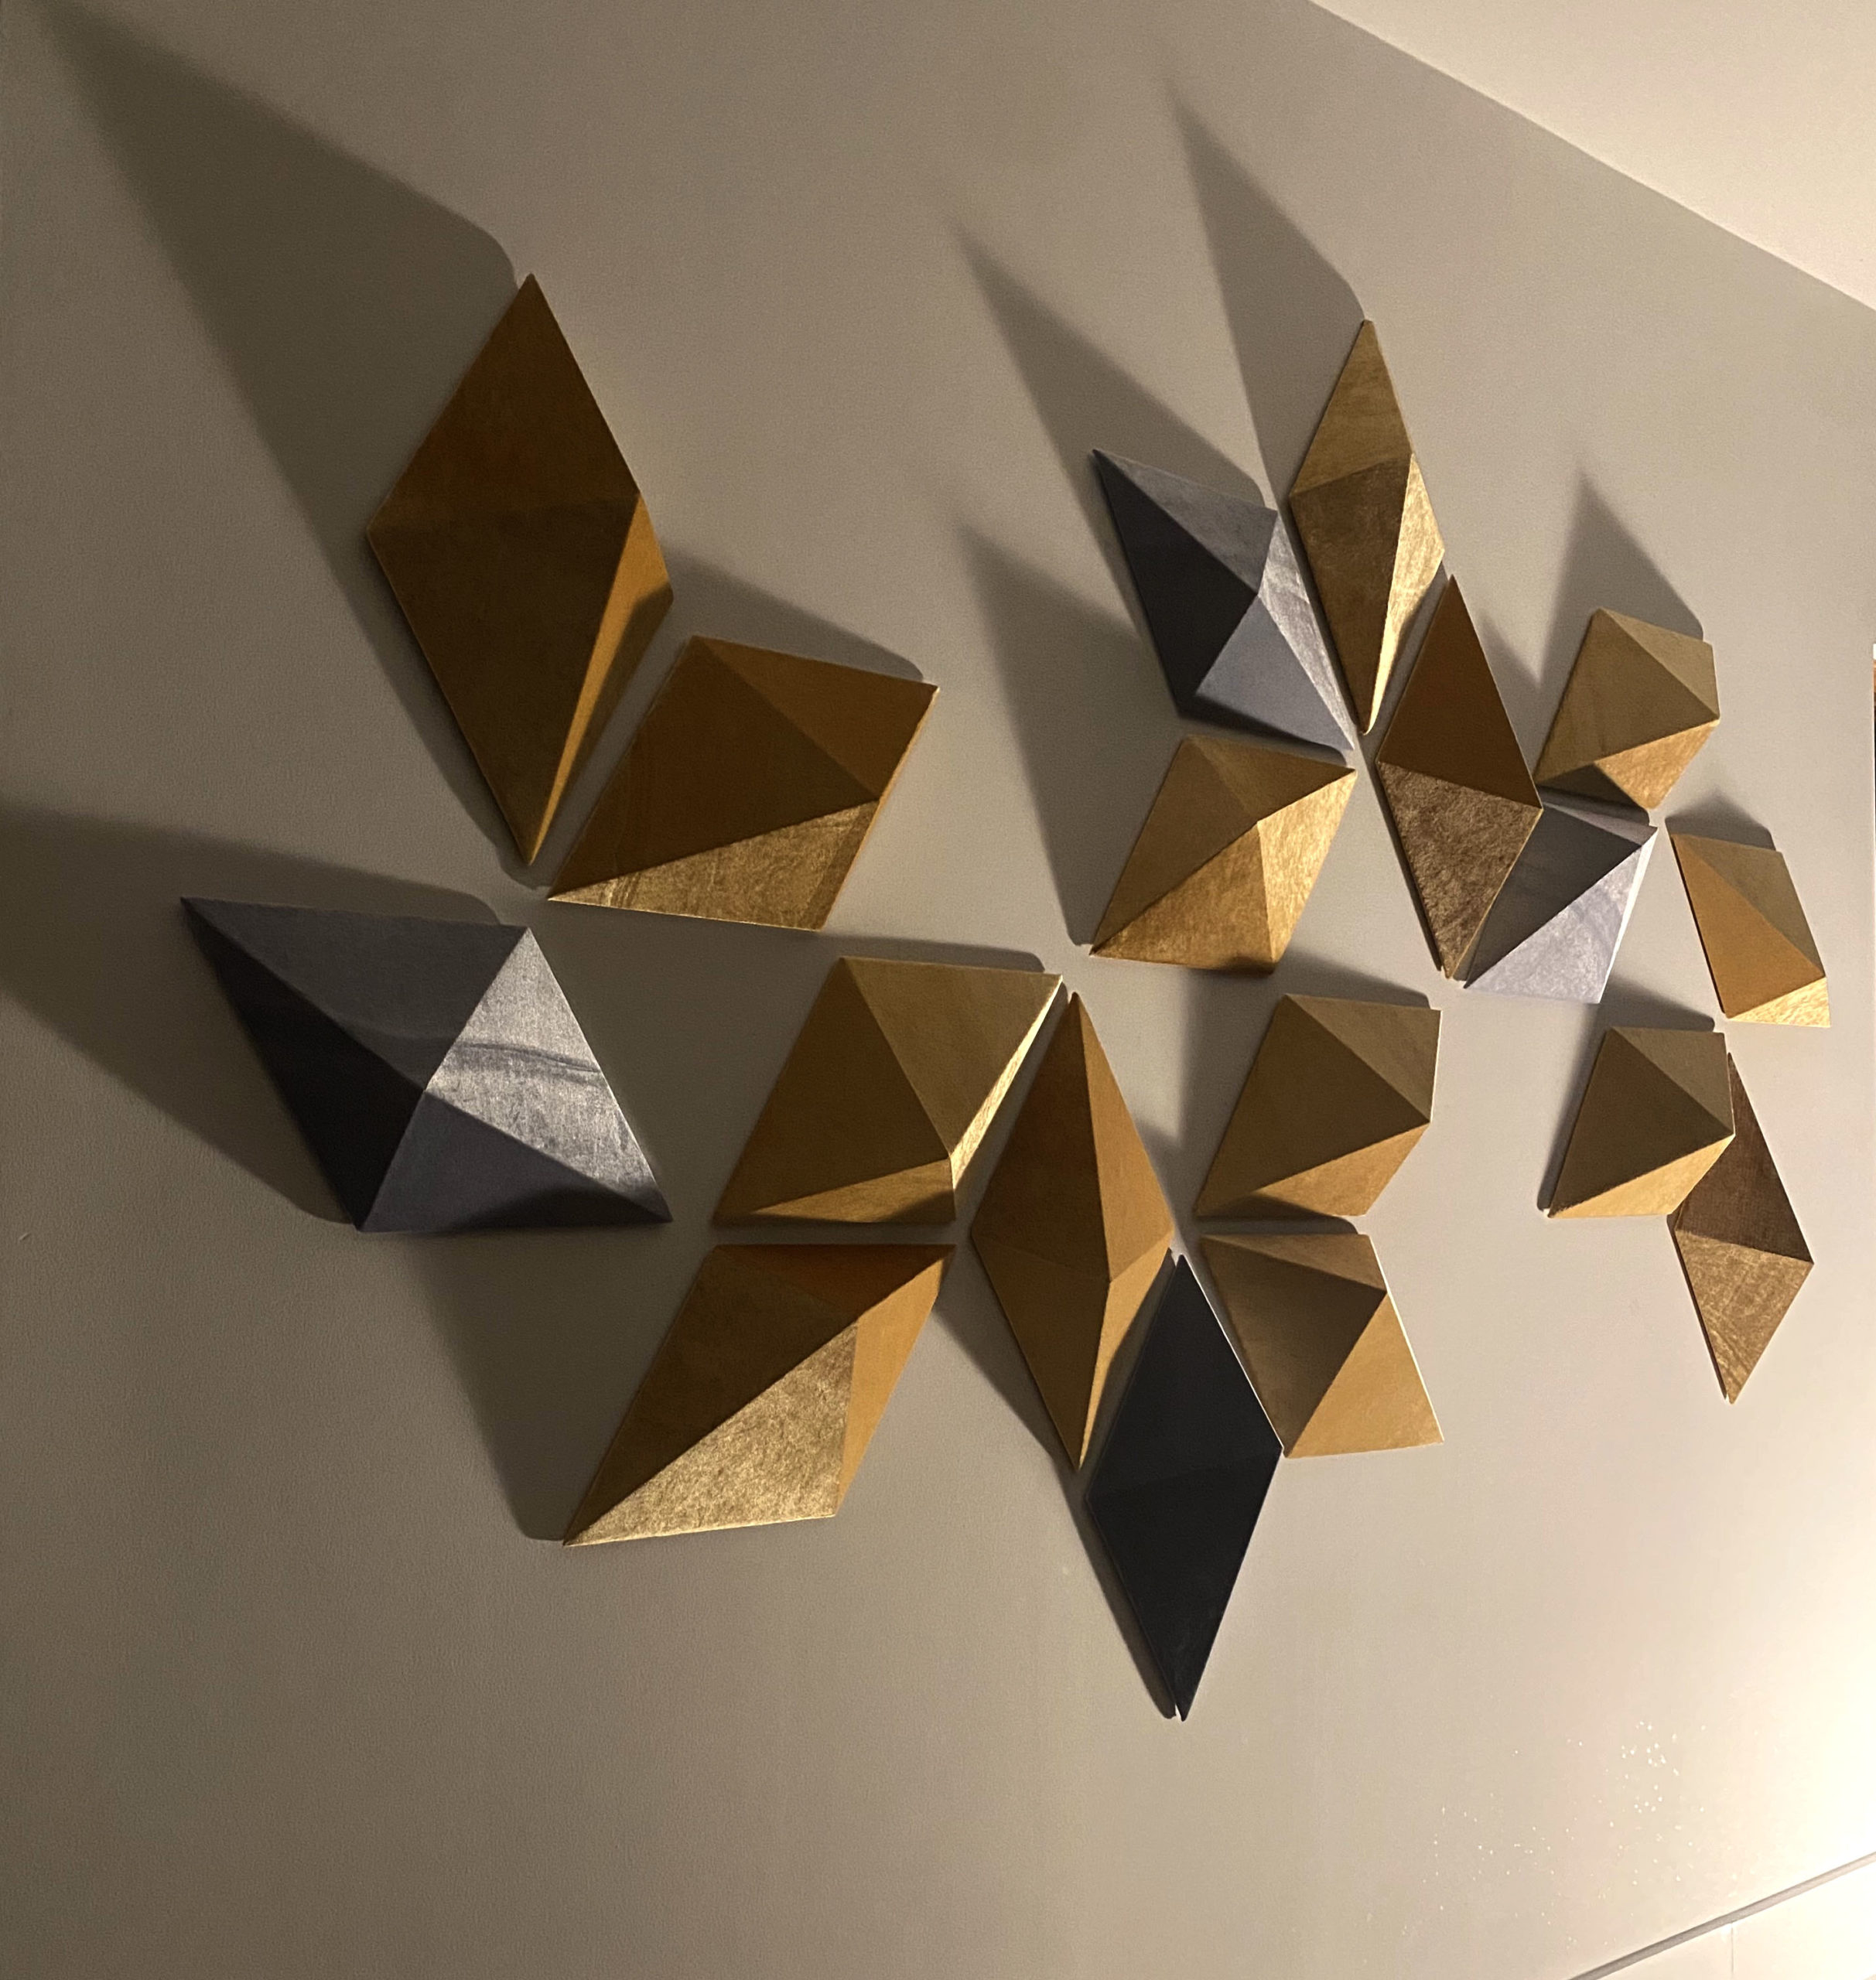 Multiple 3D Dimond shapes of gold and silver are hung on a wall with a light off to the side causing shadows to cast to the left of them.